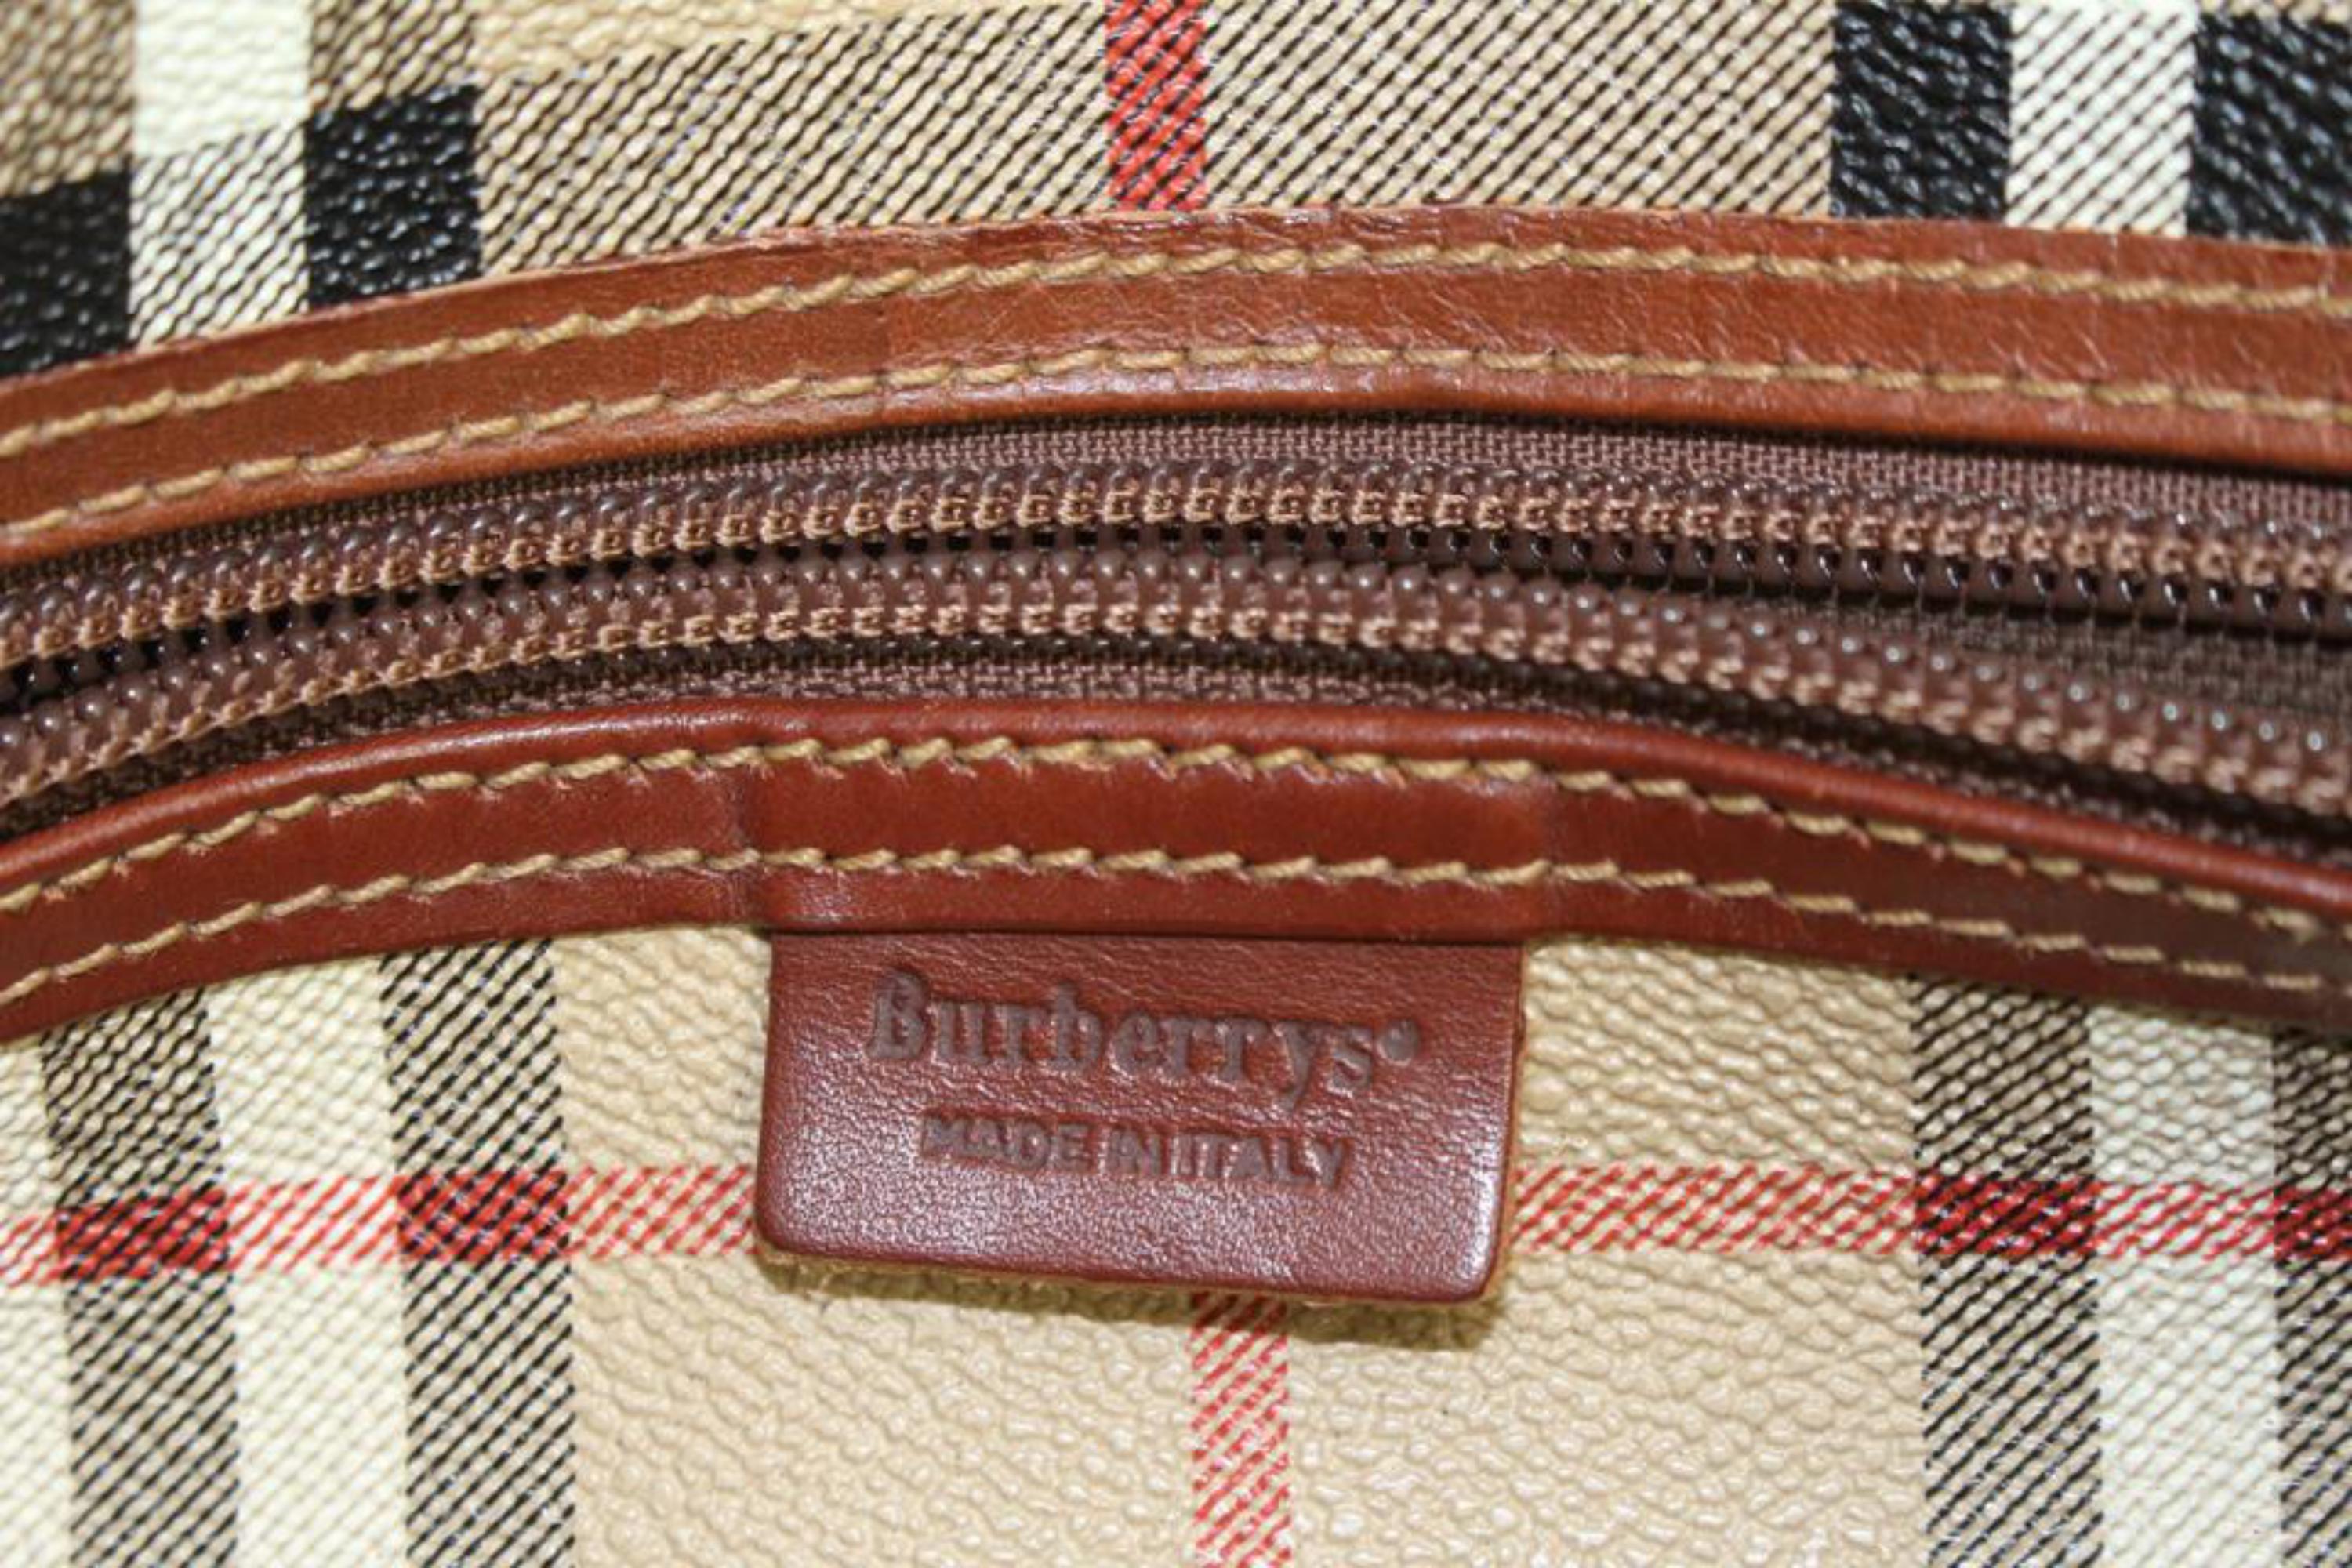 Burberry Beige Nova Check Duffle Bag with Strap Boston Upcycle ready 65b421s In Good Condition For Sale In Dix hills, NY